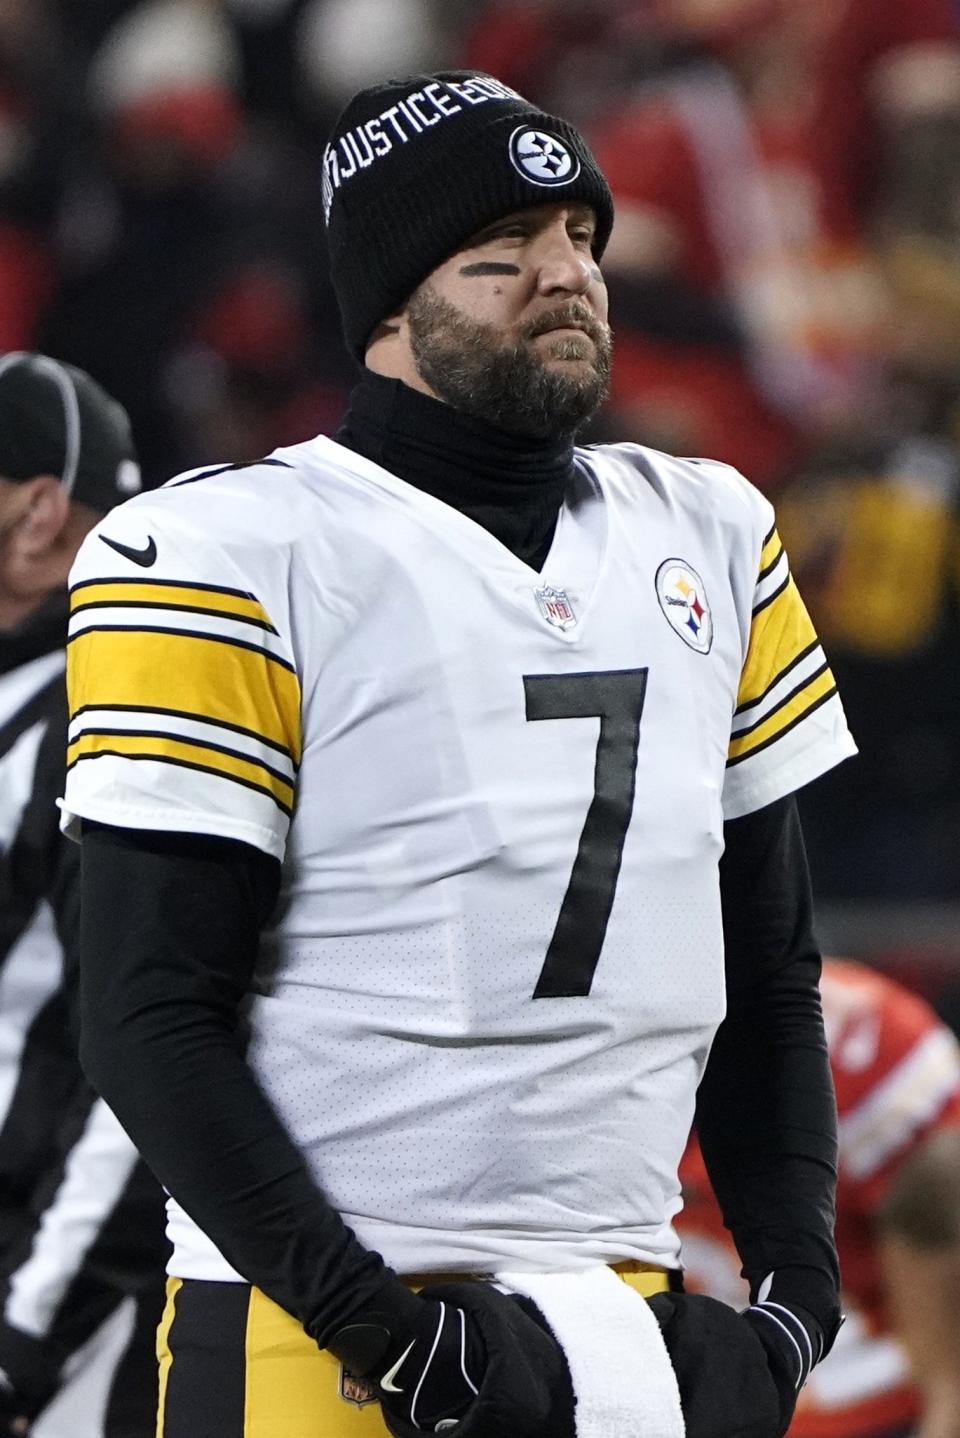 Ben Roethlisberger looks on during the Steelers' AFC wild-card playoff loss to the Chiefs on Jan. 16, 2022.